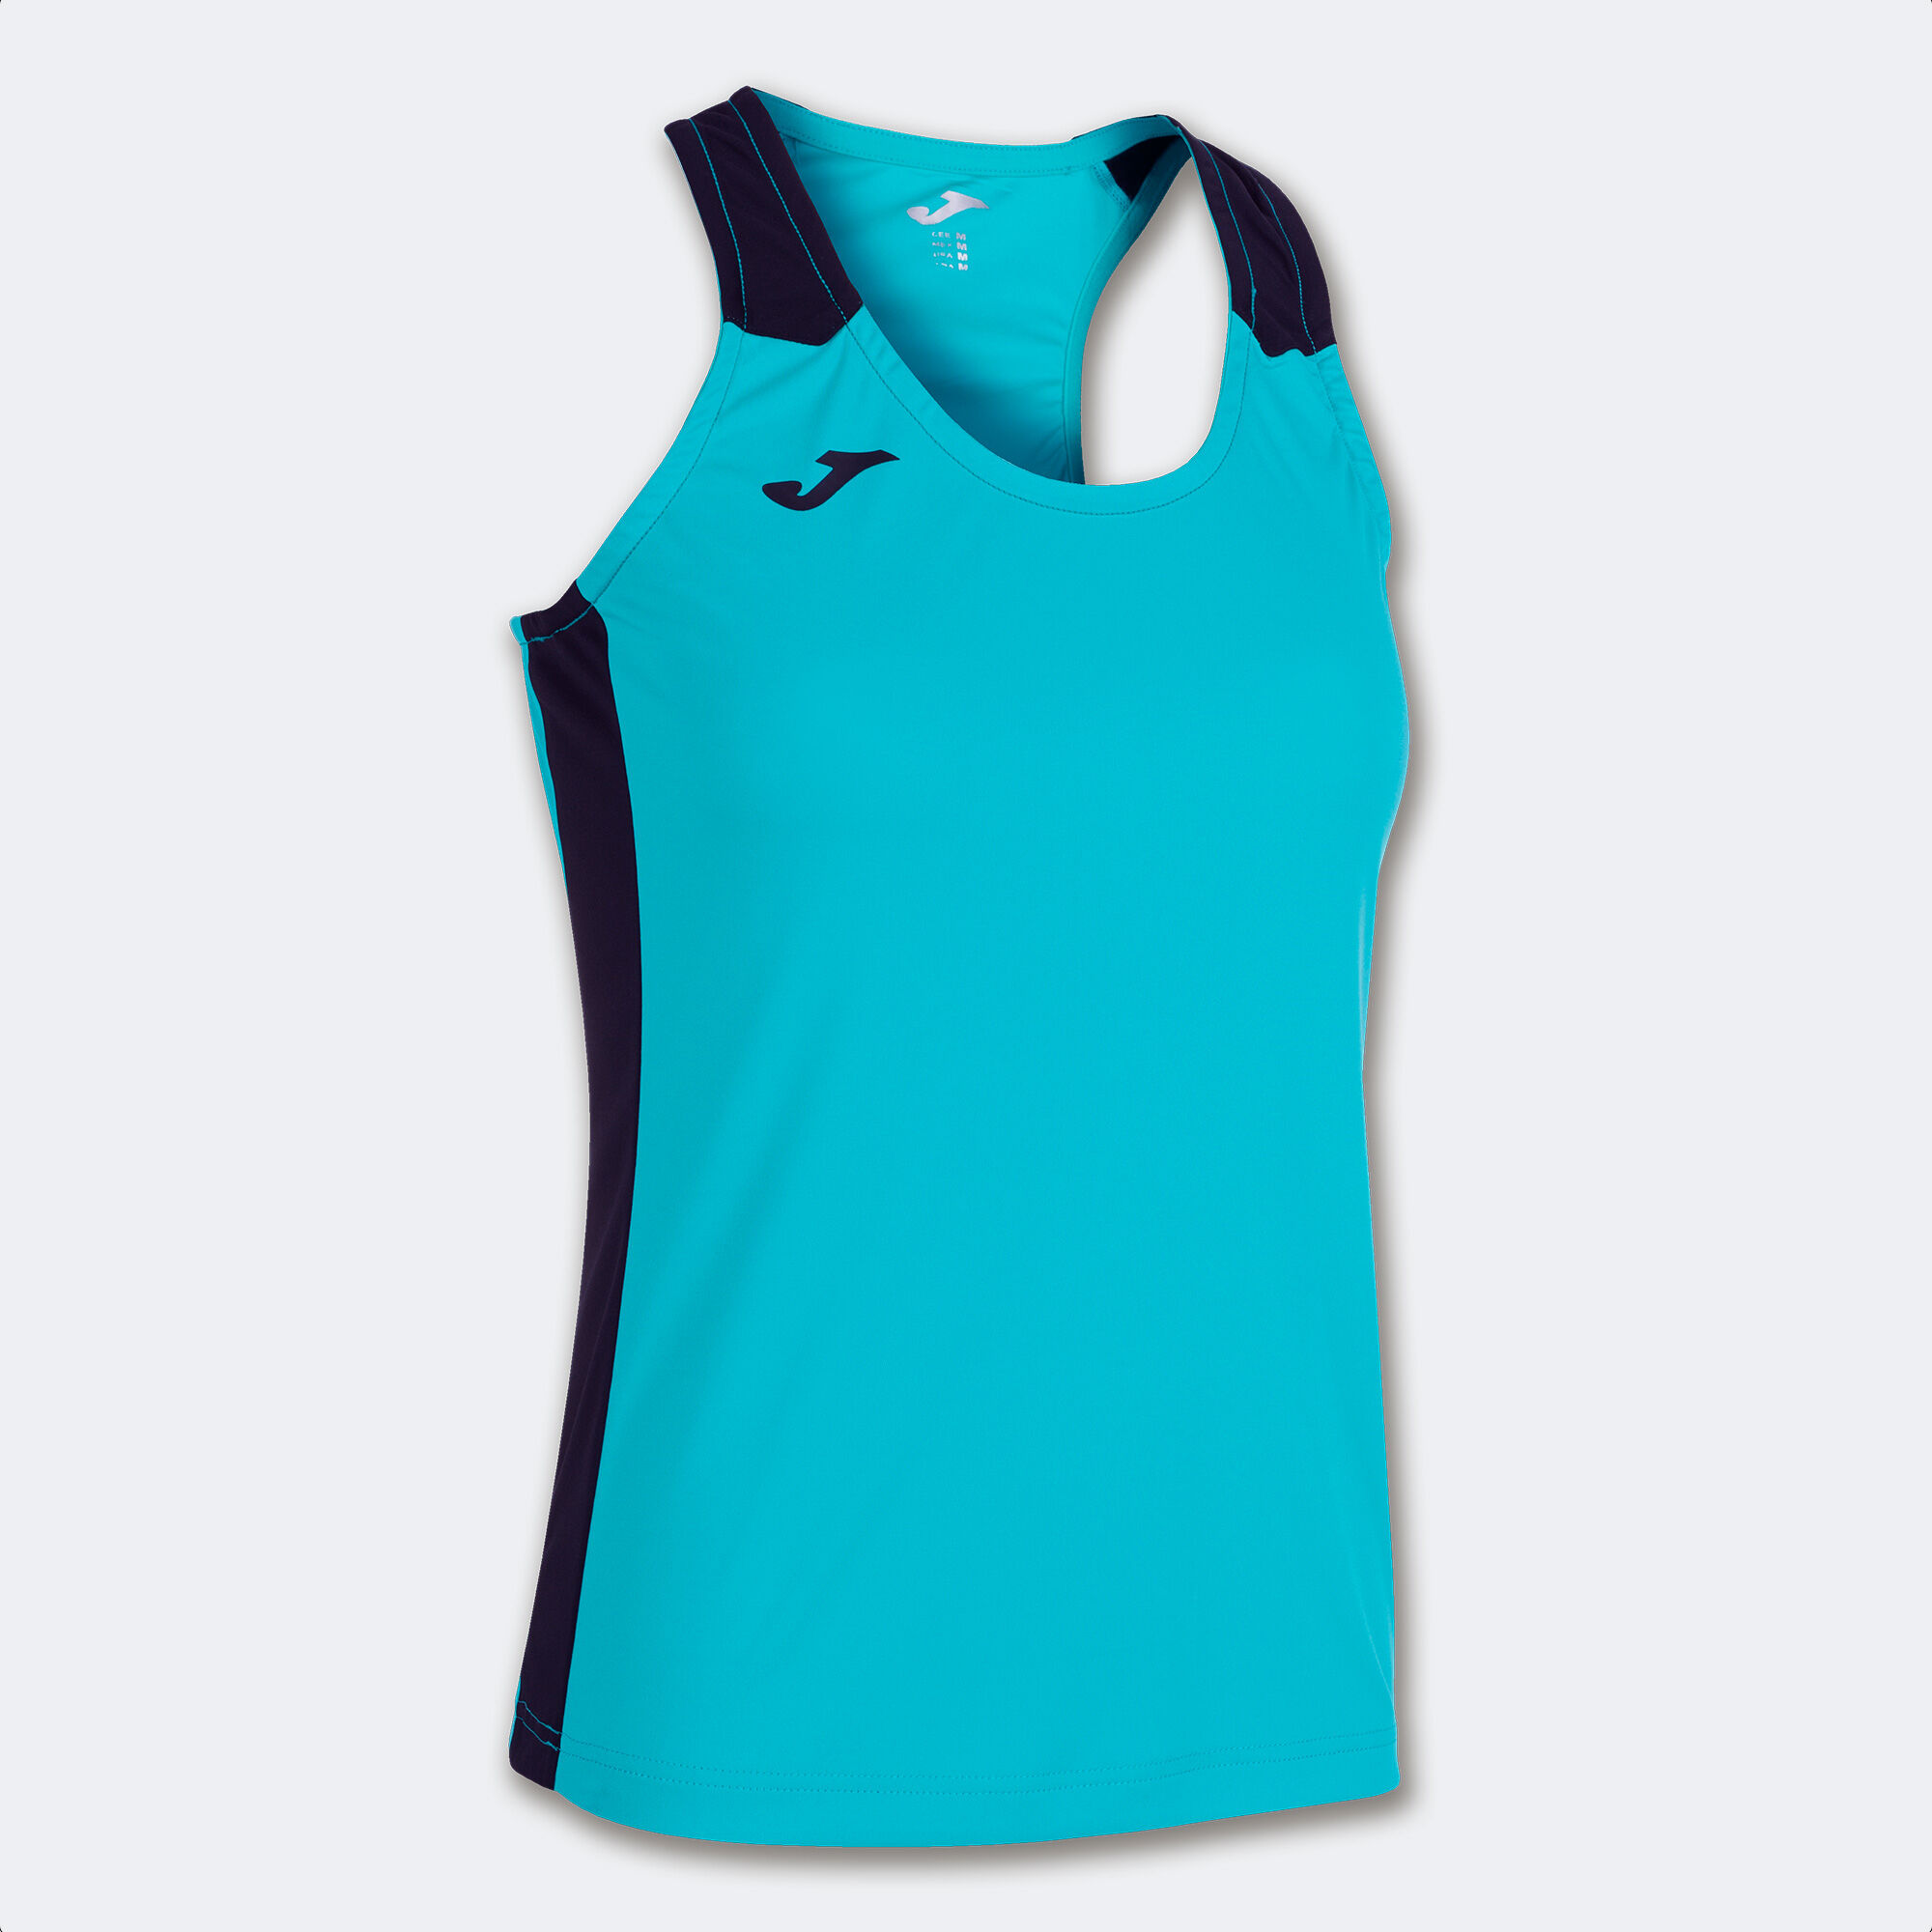 TANK TOP WOMAN RECORD II FLUORESCENT TURQUOISE NAVY BLUE